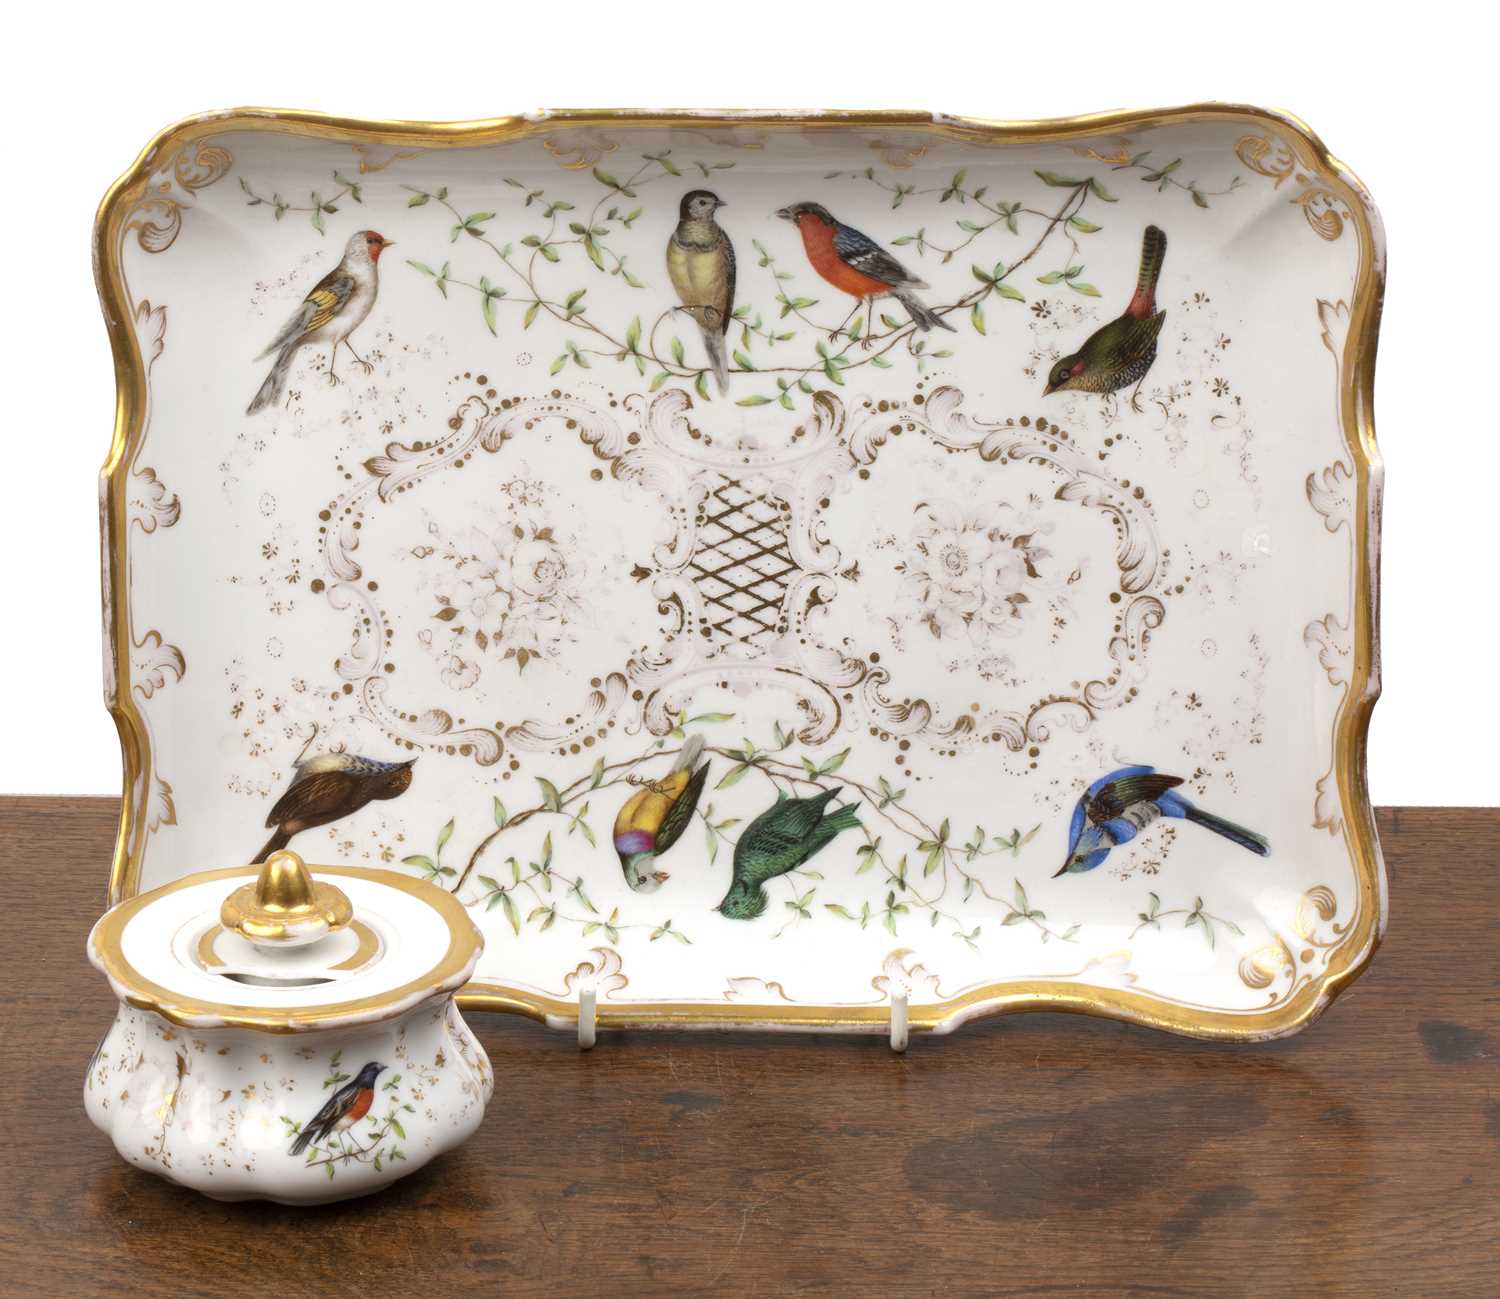 Berlin KPM porcelain ink or desk stand with one accompanying inkwell, decorated with various birds